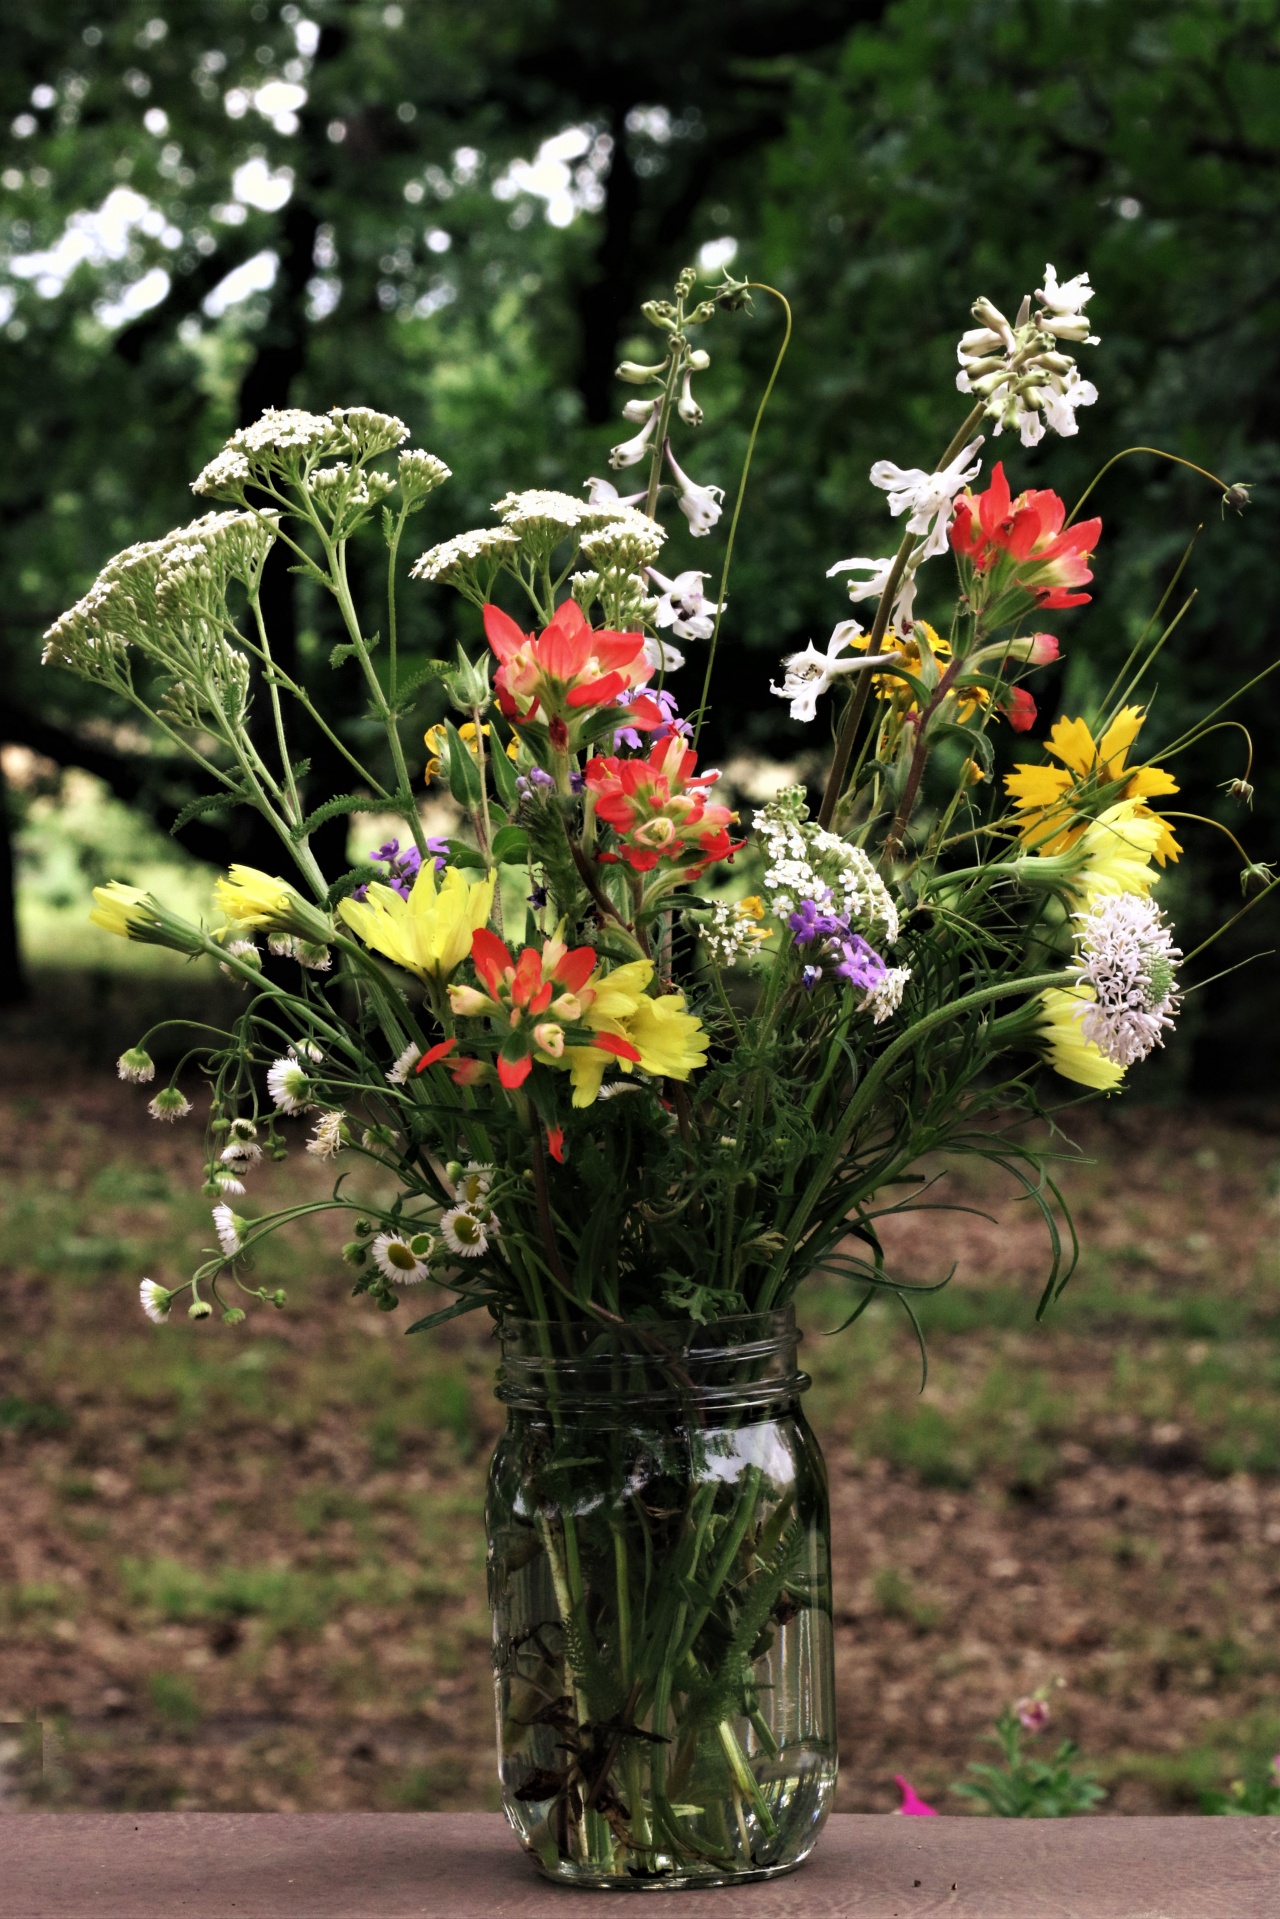 Close-up of various wildflowers in a jar sitting outside on a picnic table.